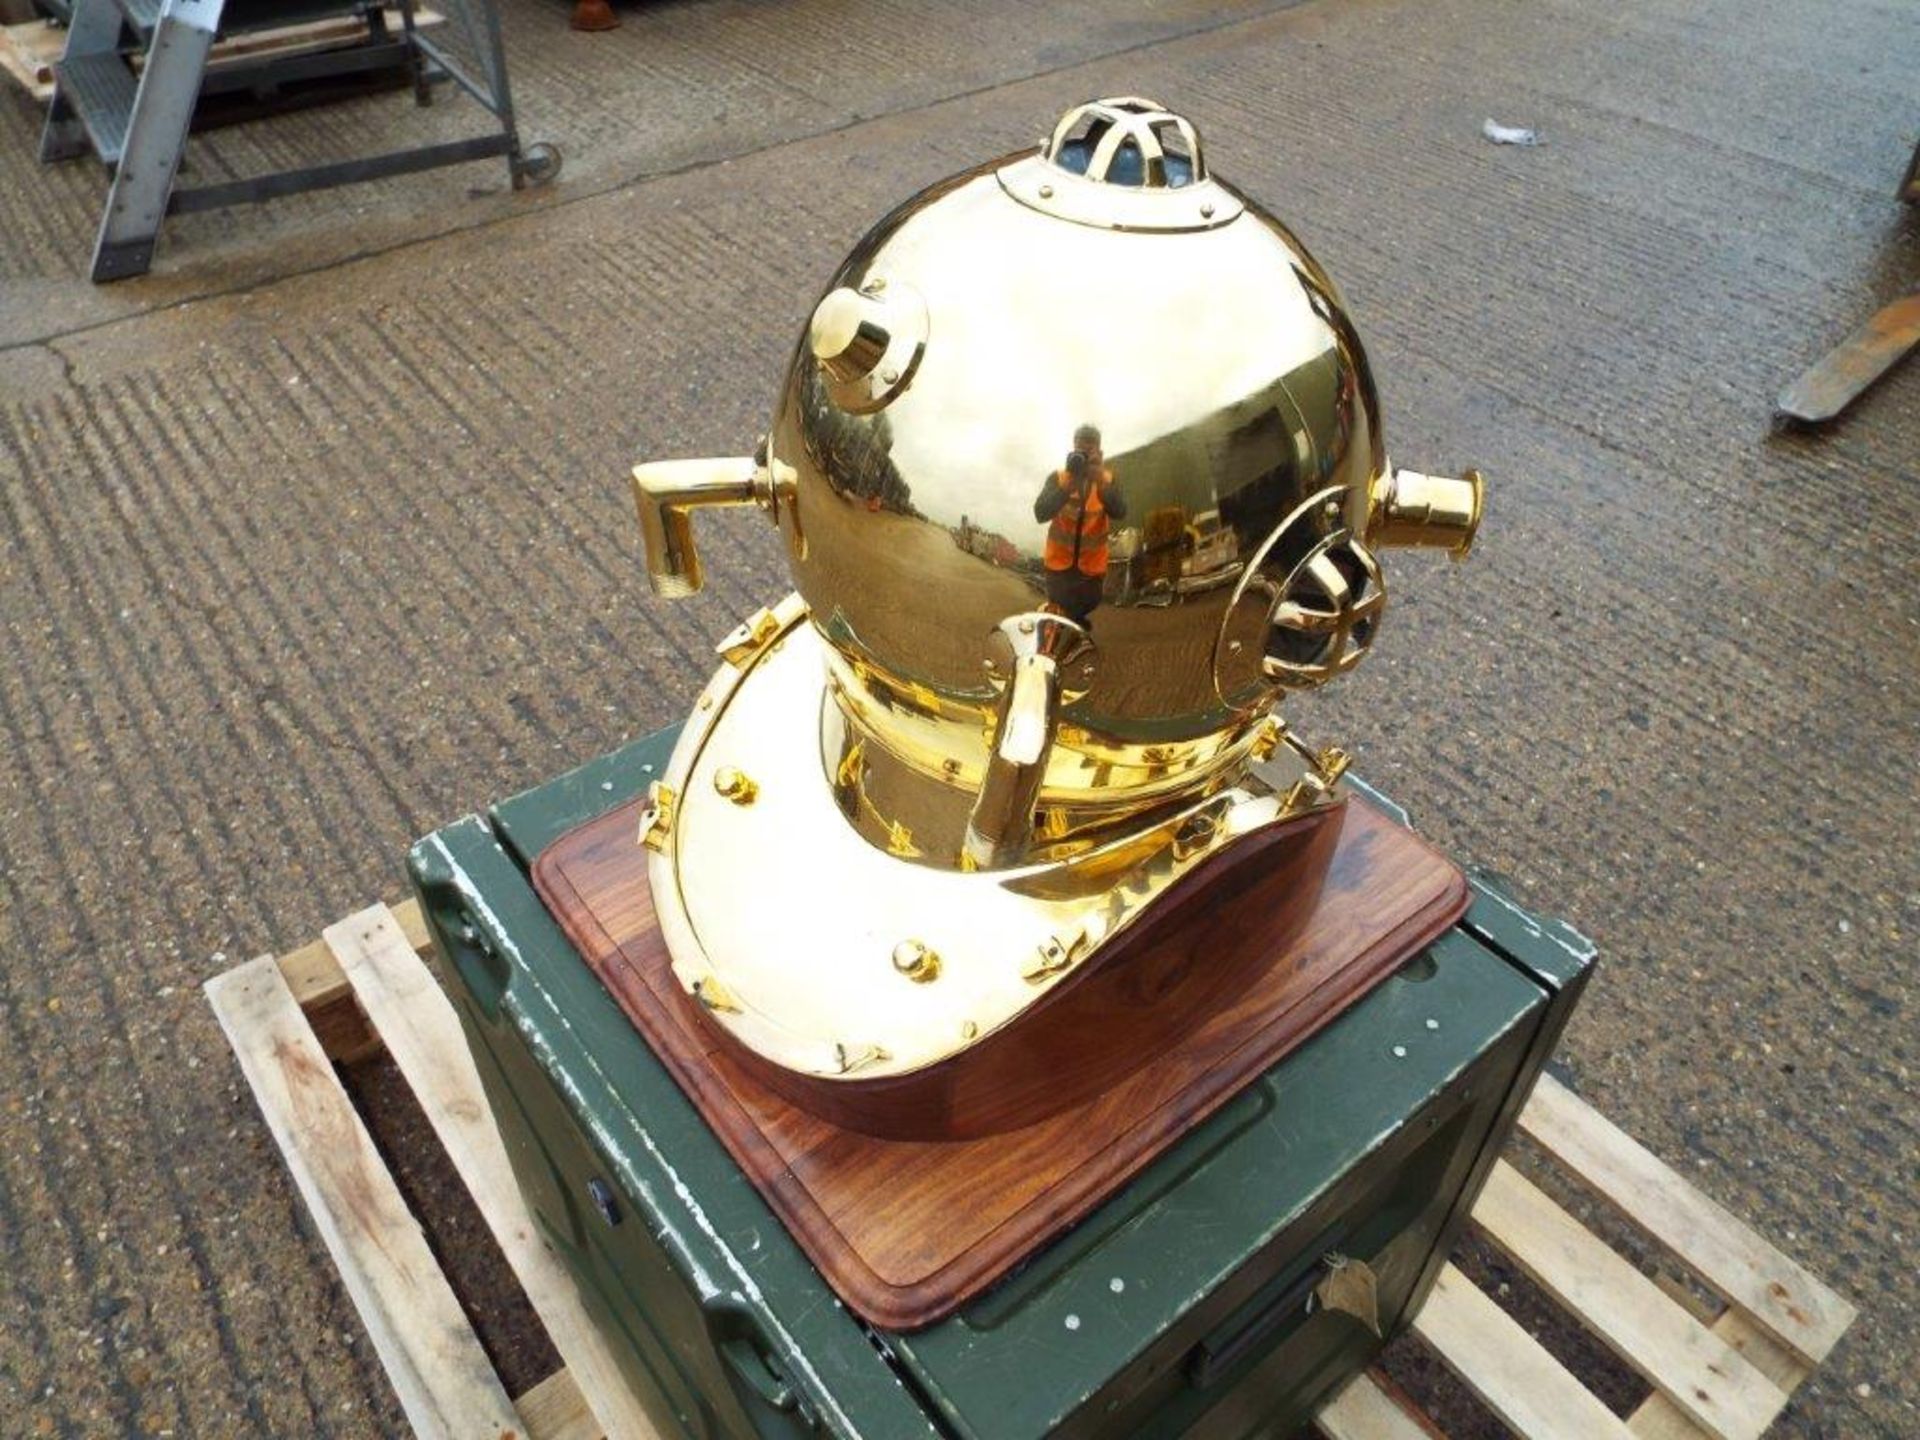 Replica Full Size U.S. Navy Mark V Brass Diving Helmet on Wooden Display Stand - Image 4 of 6